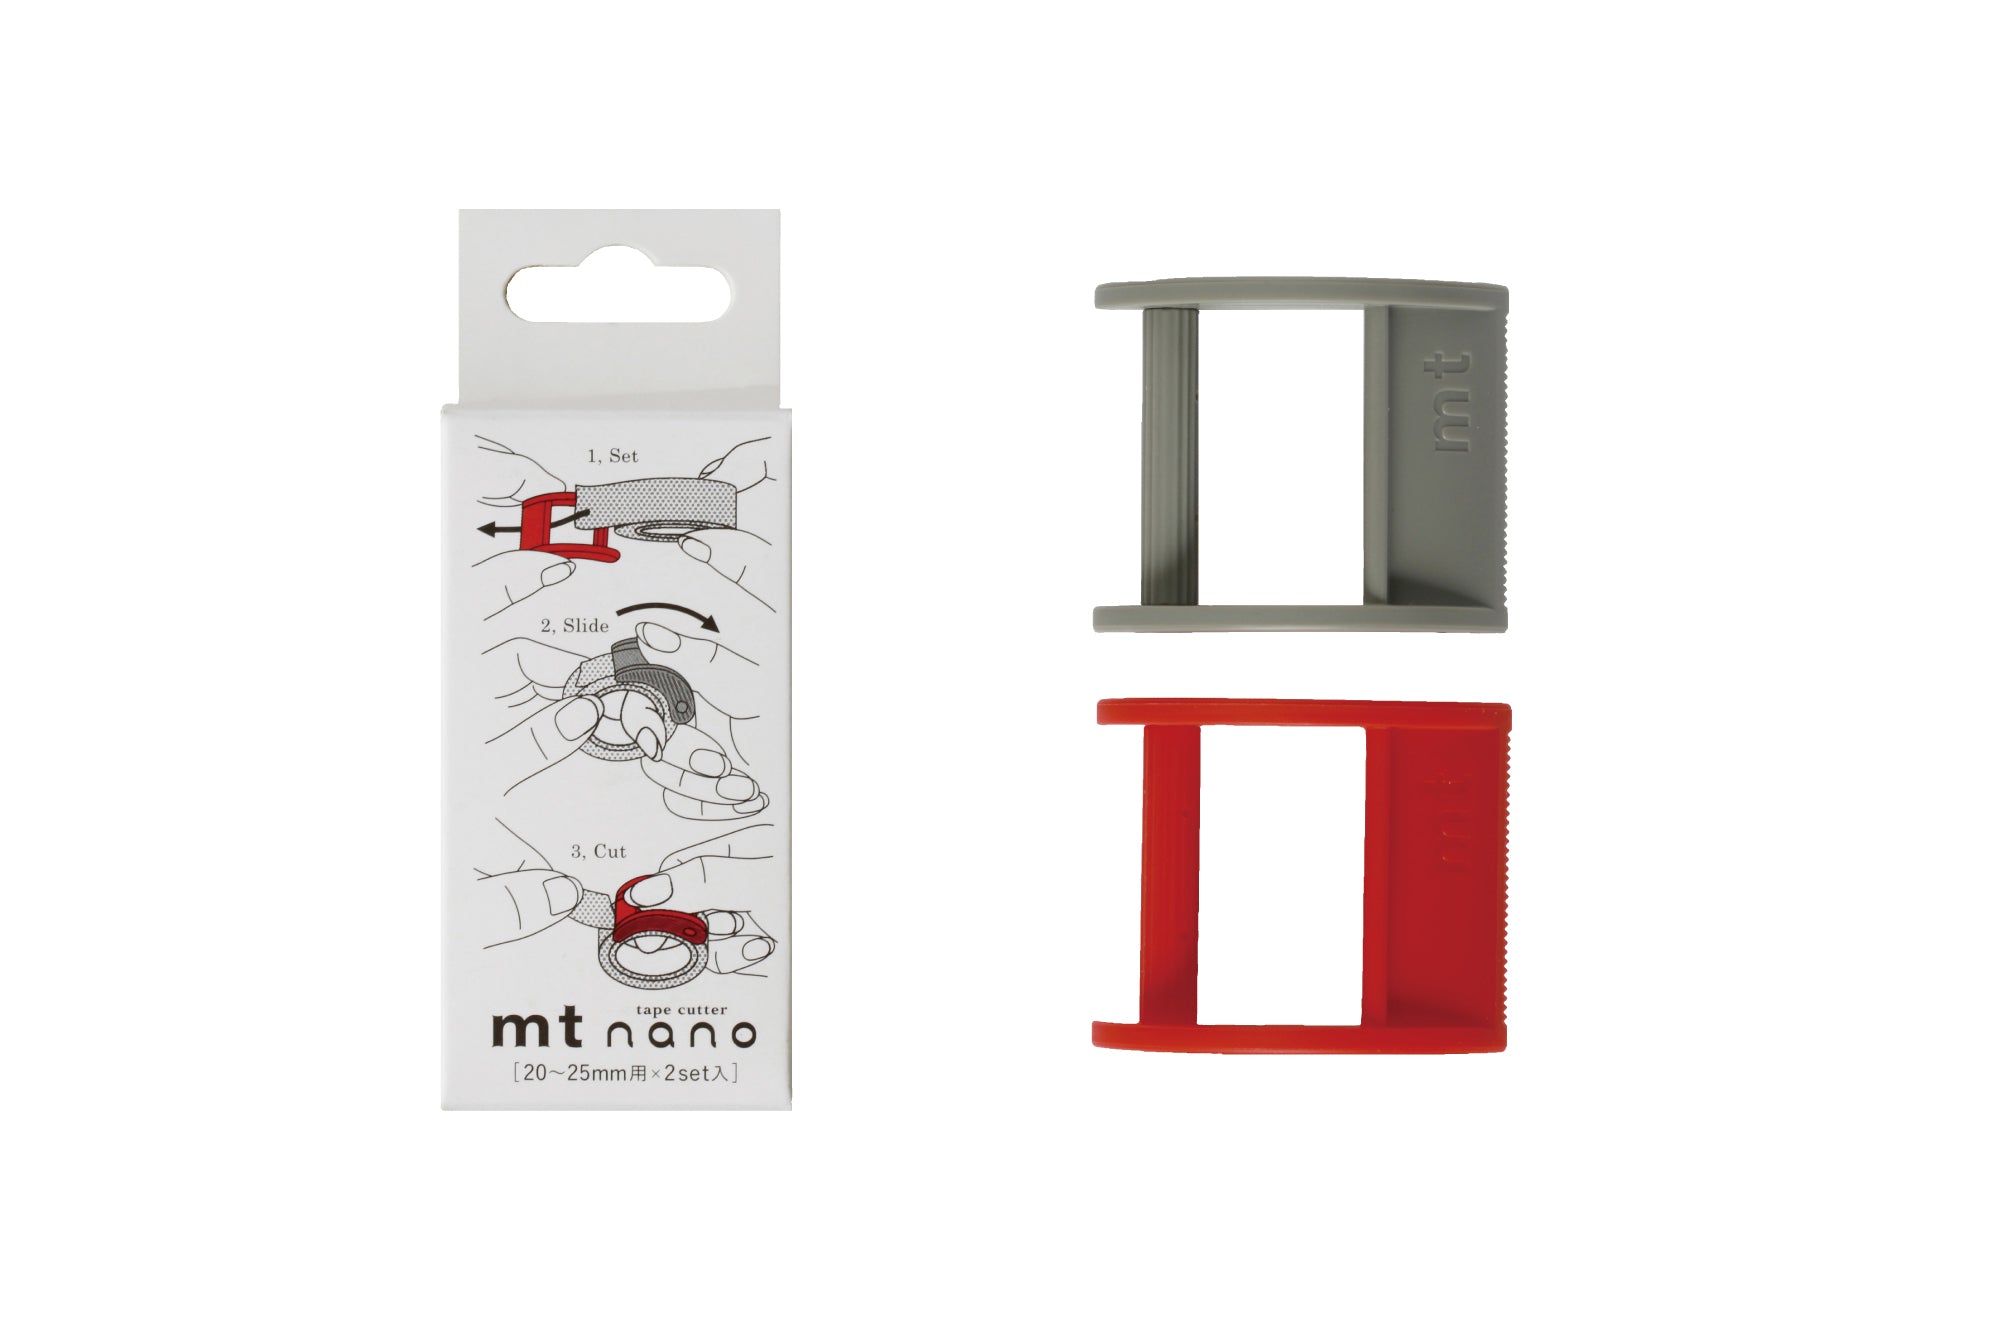 mt Tape Cutter - Nano set of 2 - for 20-25mm Washi Tape